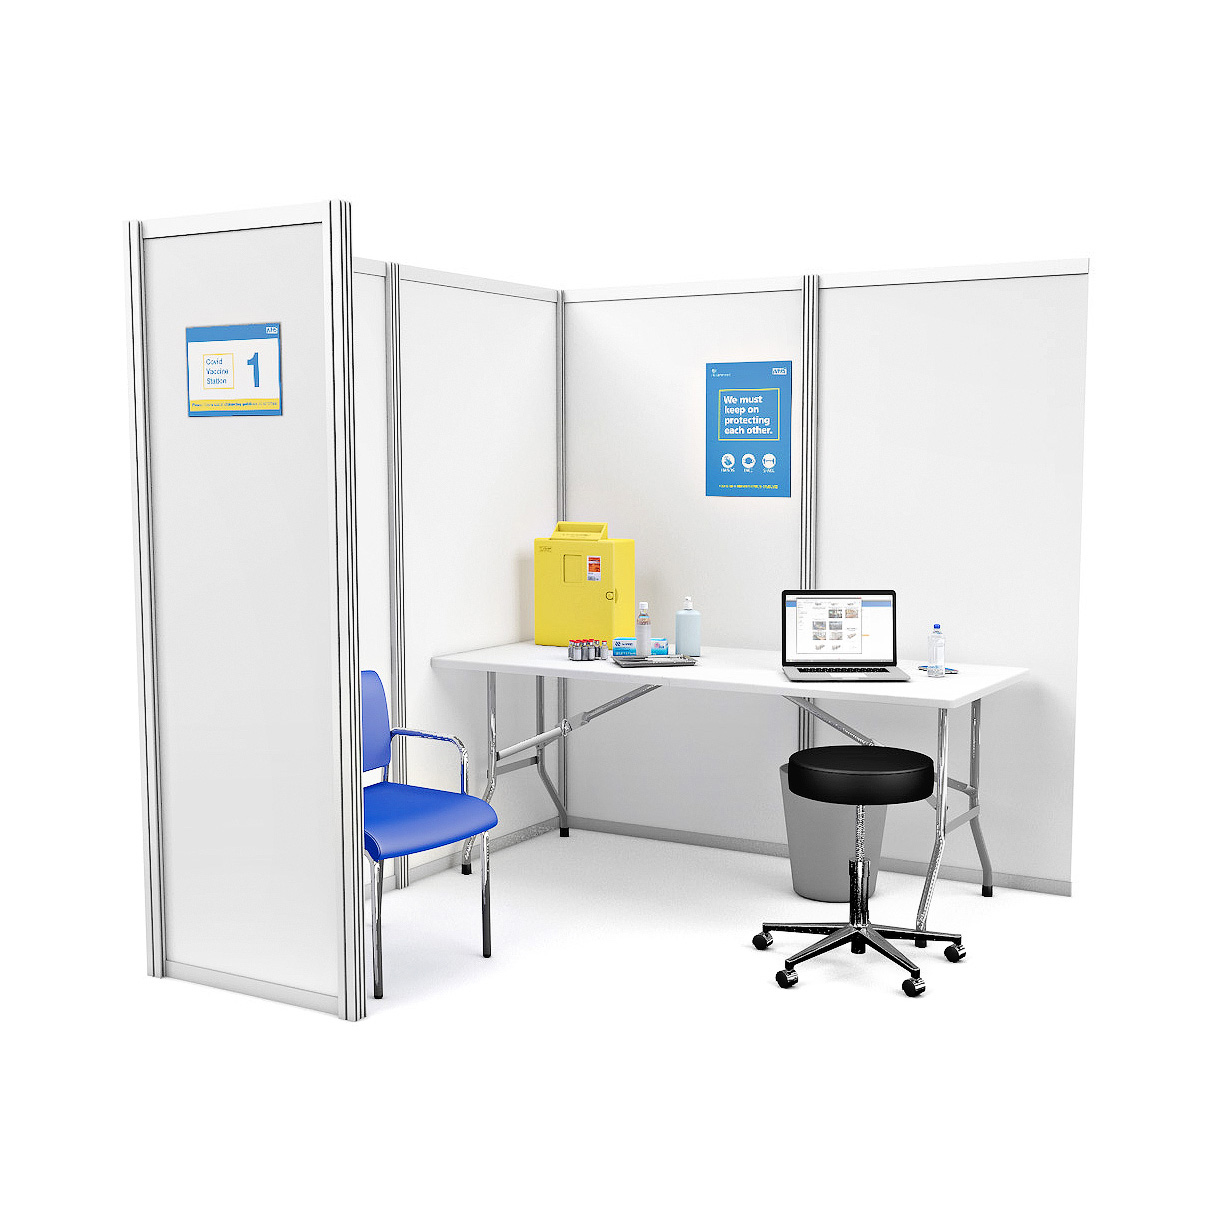 COVID Vaccination Booth Cubicles